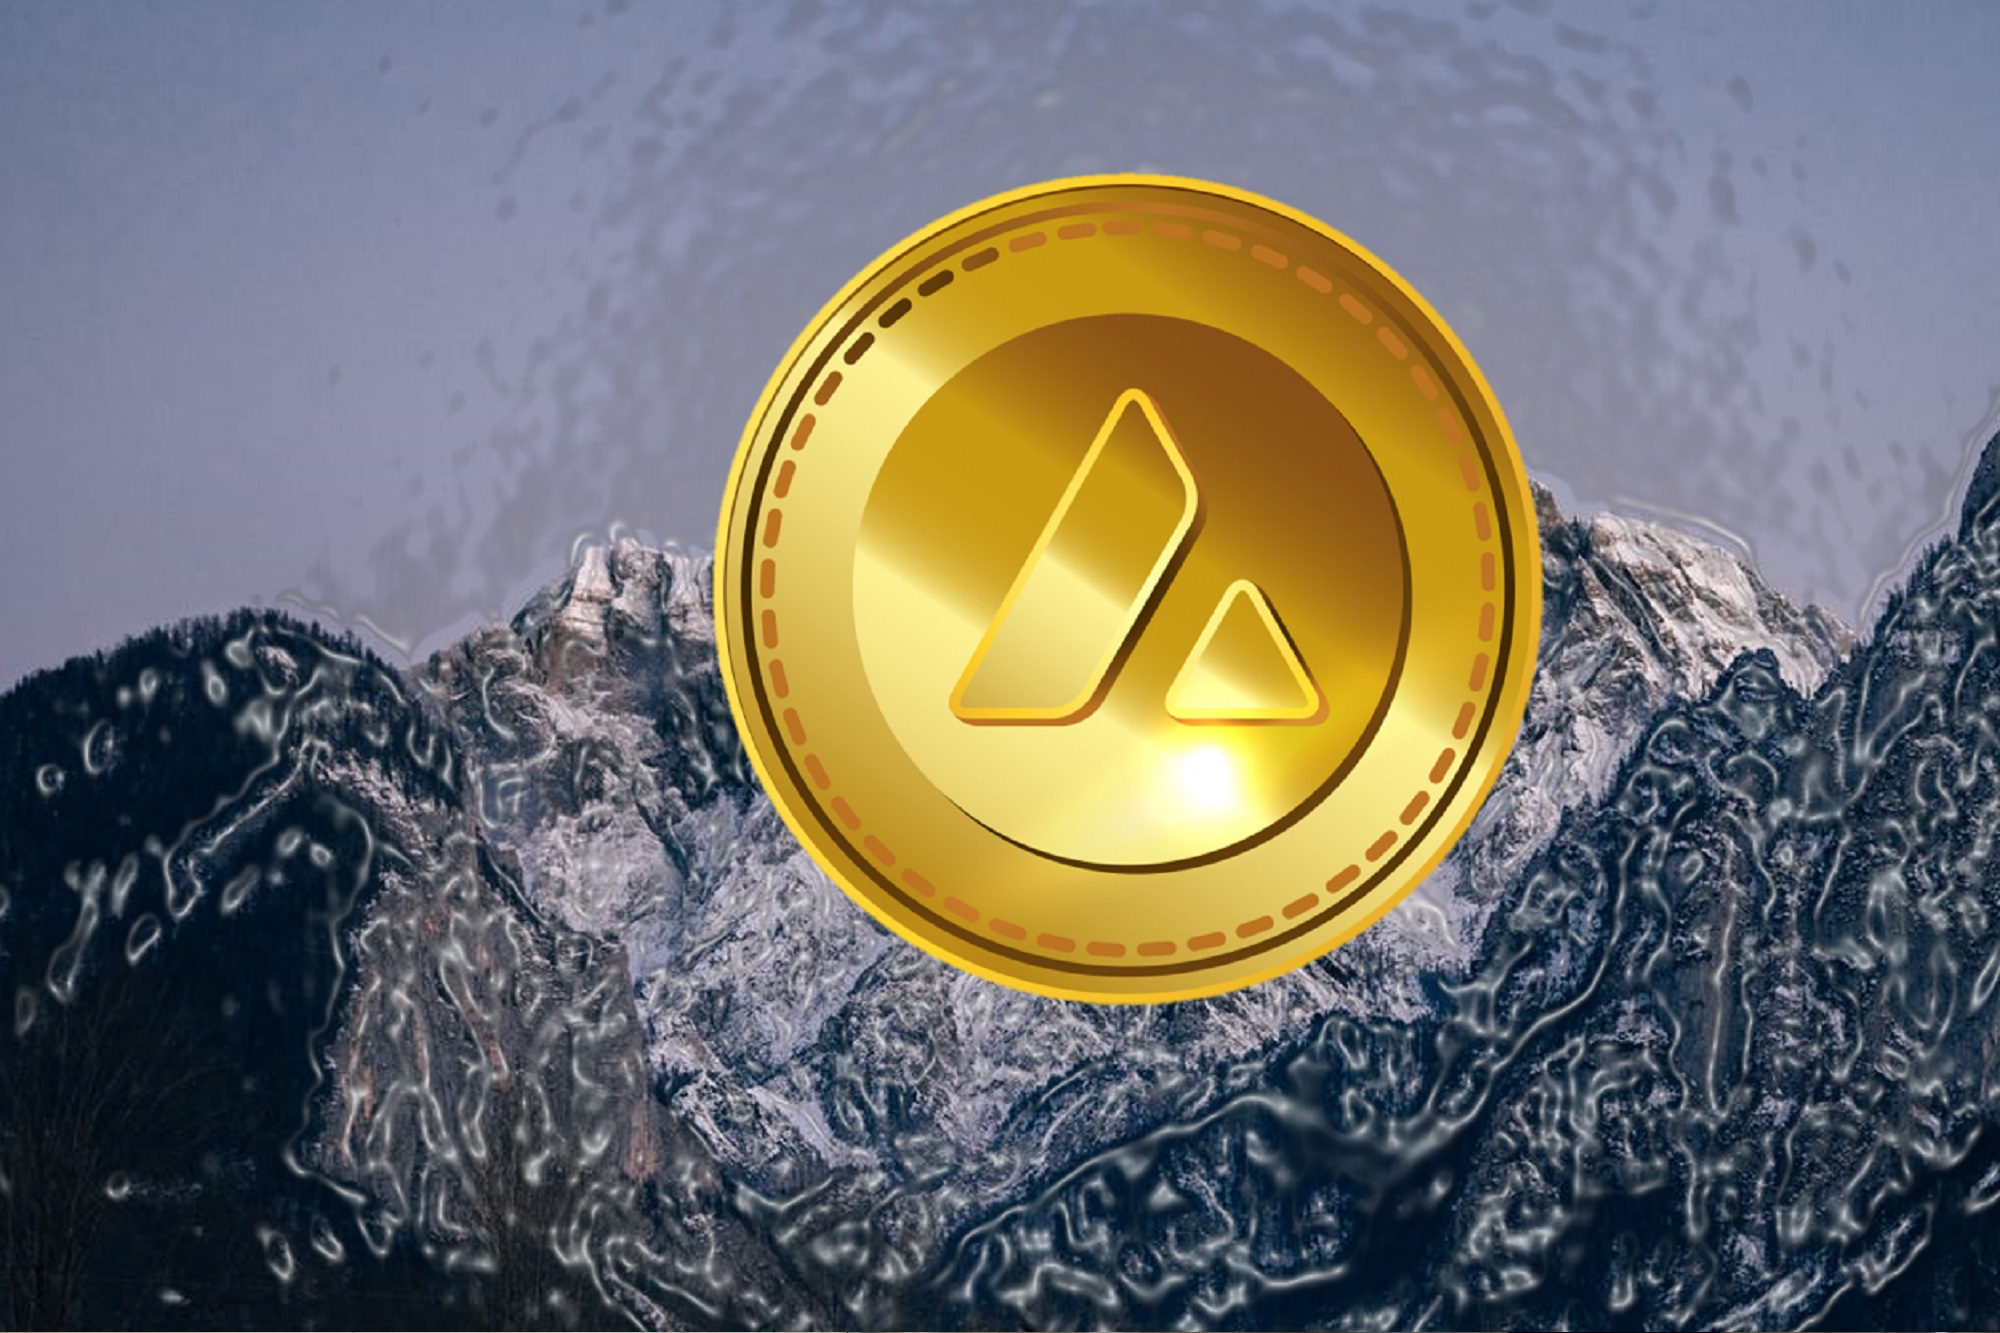 avalanche crypto buy or sell